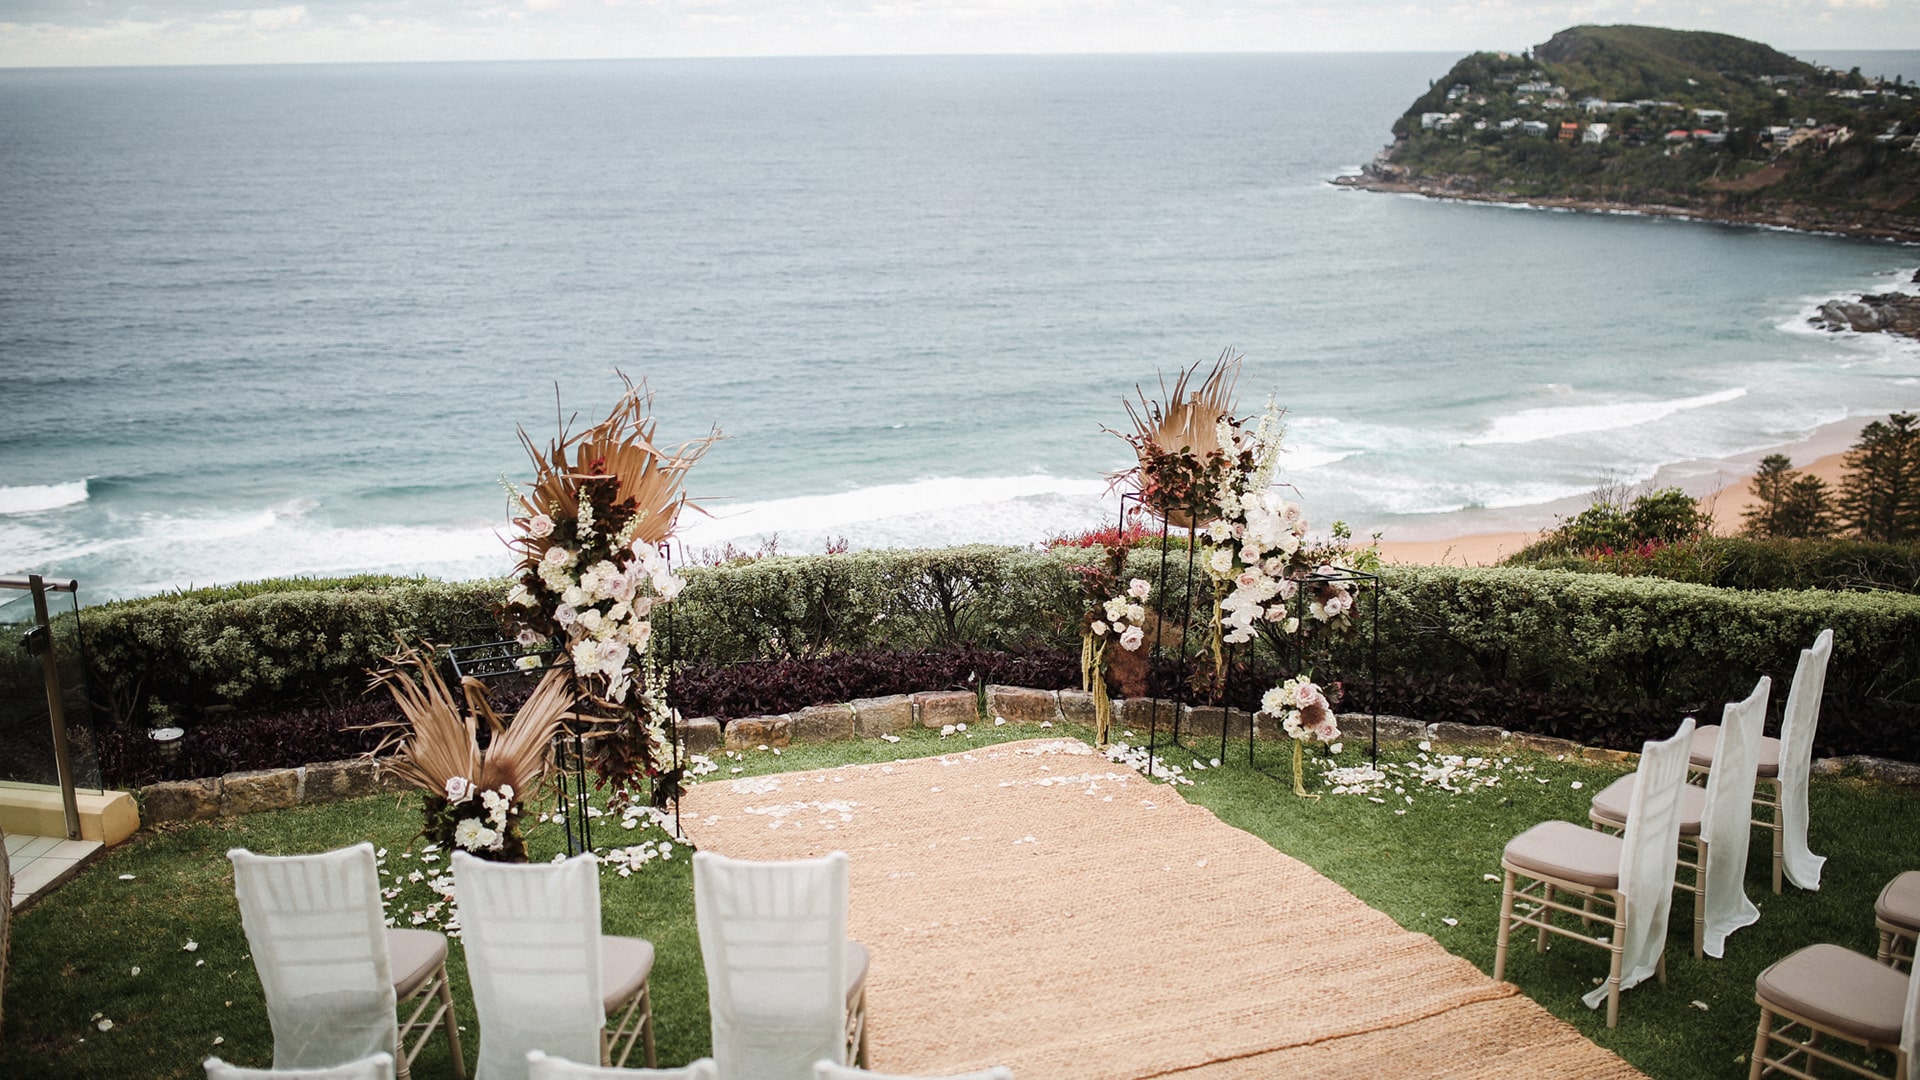 Northern Beaches Wedding Ceremony Location And Reception Venues Jonahs Whale Beach 